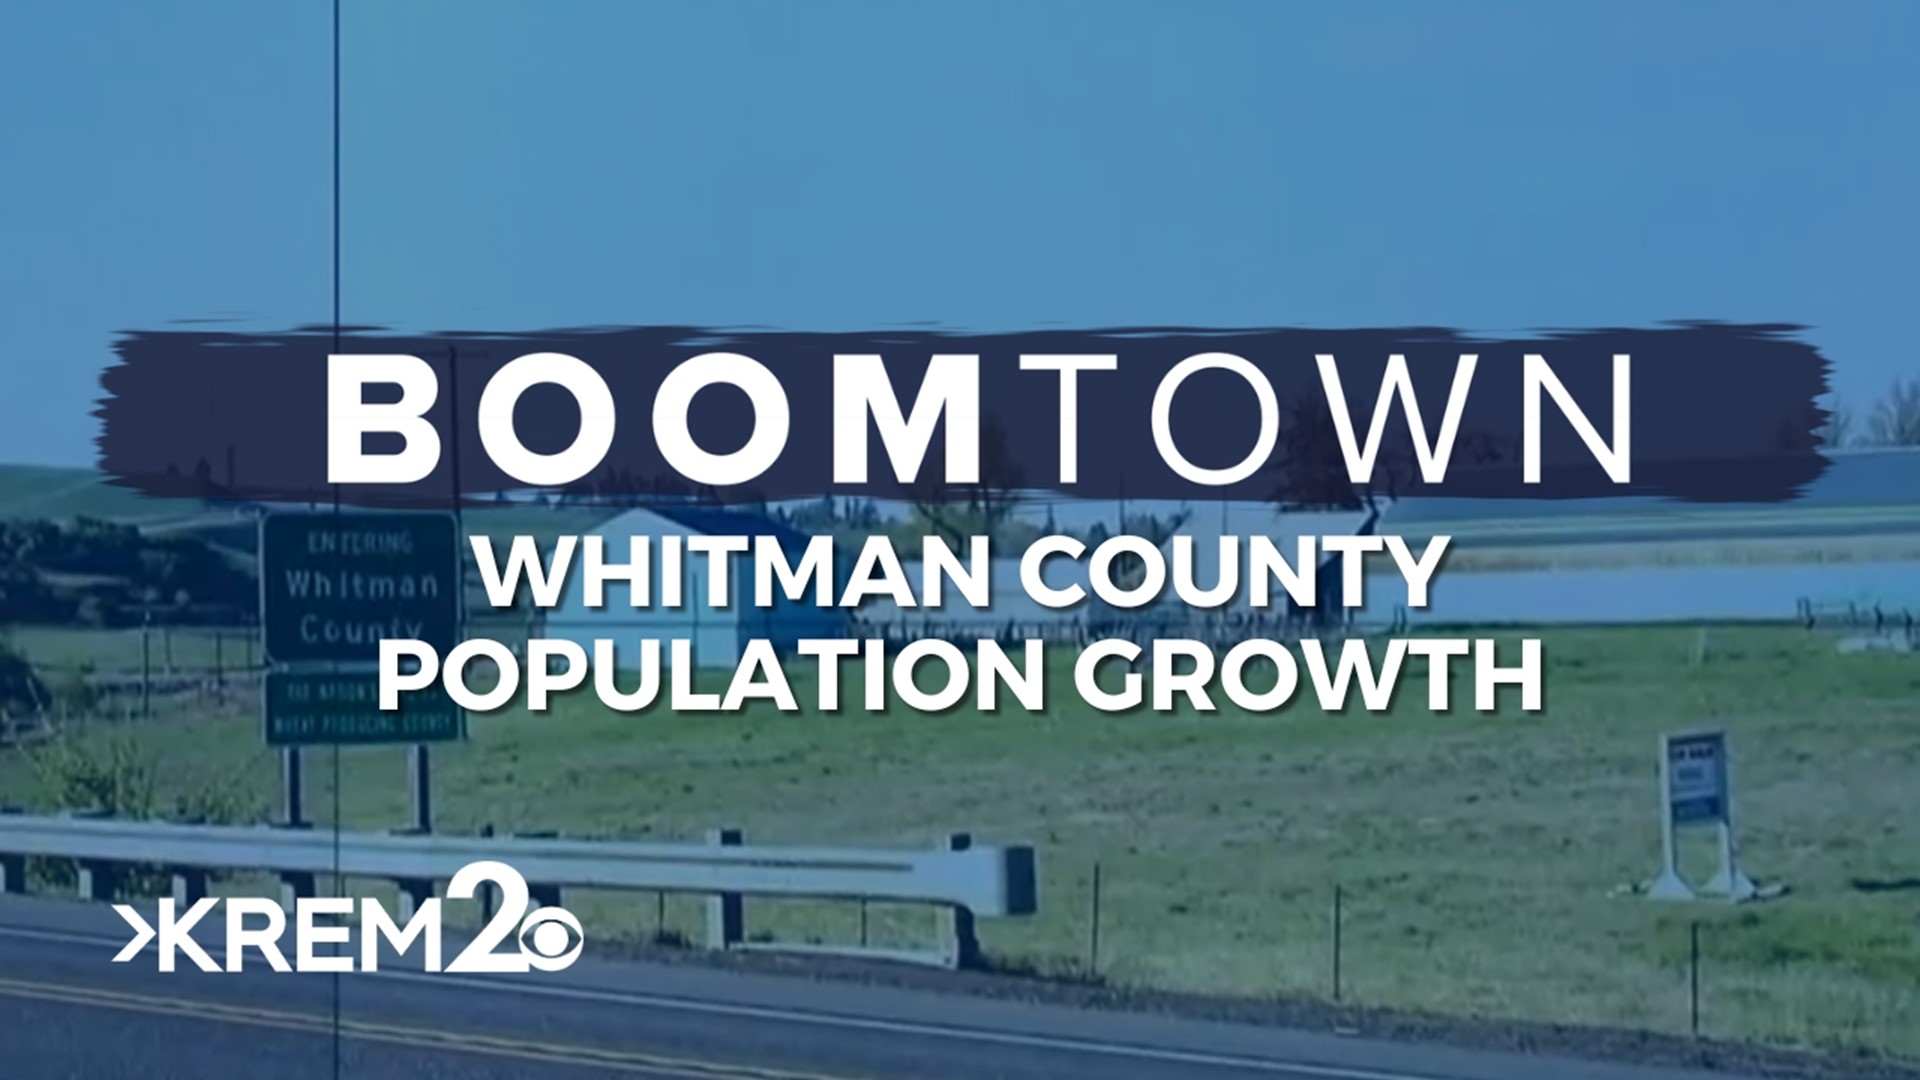 Whitman County’s population dropped by 9.6% between 2020 and 2021 but then grew by 10.1% in 2022, which is the most of any county above 20,000 in population.